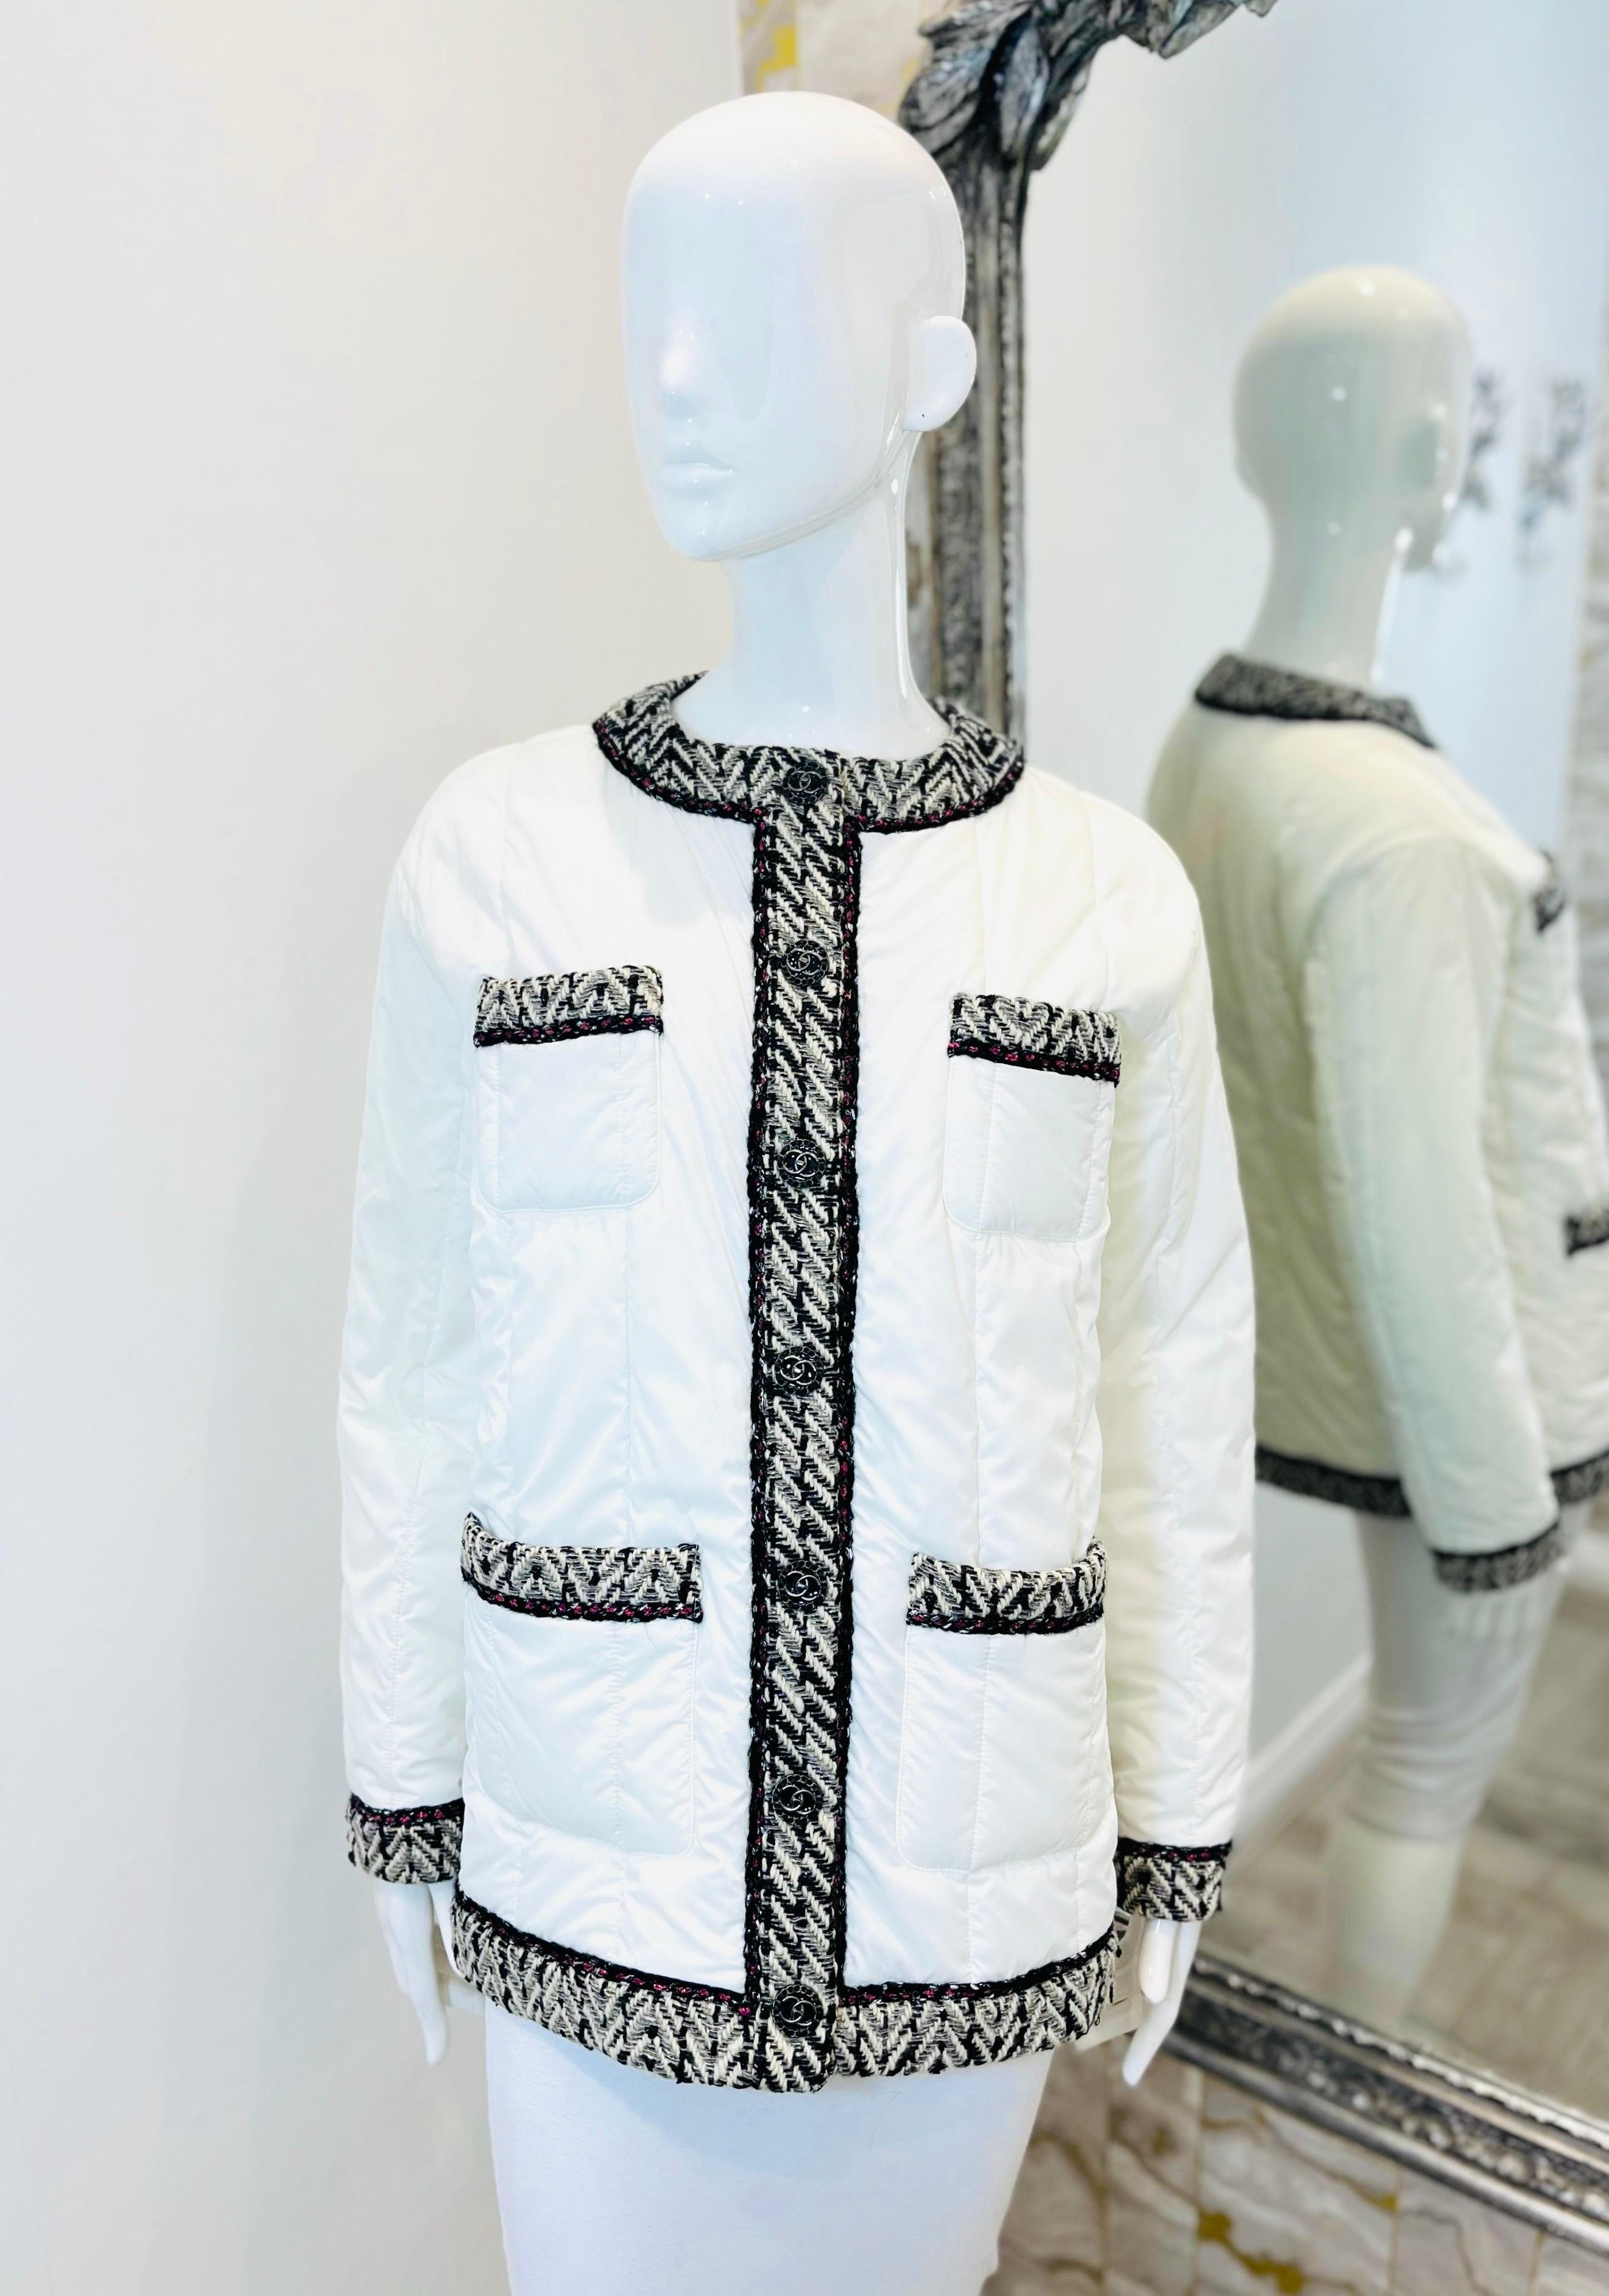 Brand New - Chanel Padded Jacket With Wool & Silk Trim & 'CC' Logo Buttons

White quilted jacket designed with black and white chevron-effect trims detailed with metallic silver and pink threads.

Featuring 'CC' logo snap buttons embellished with